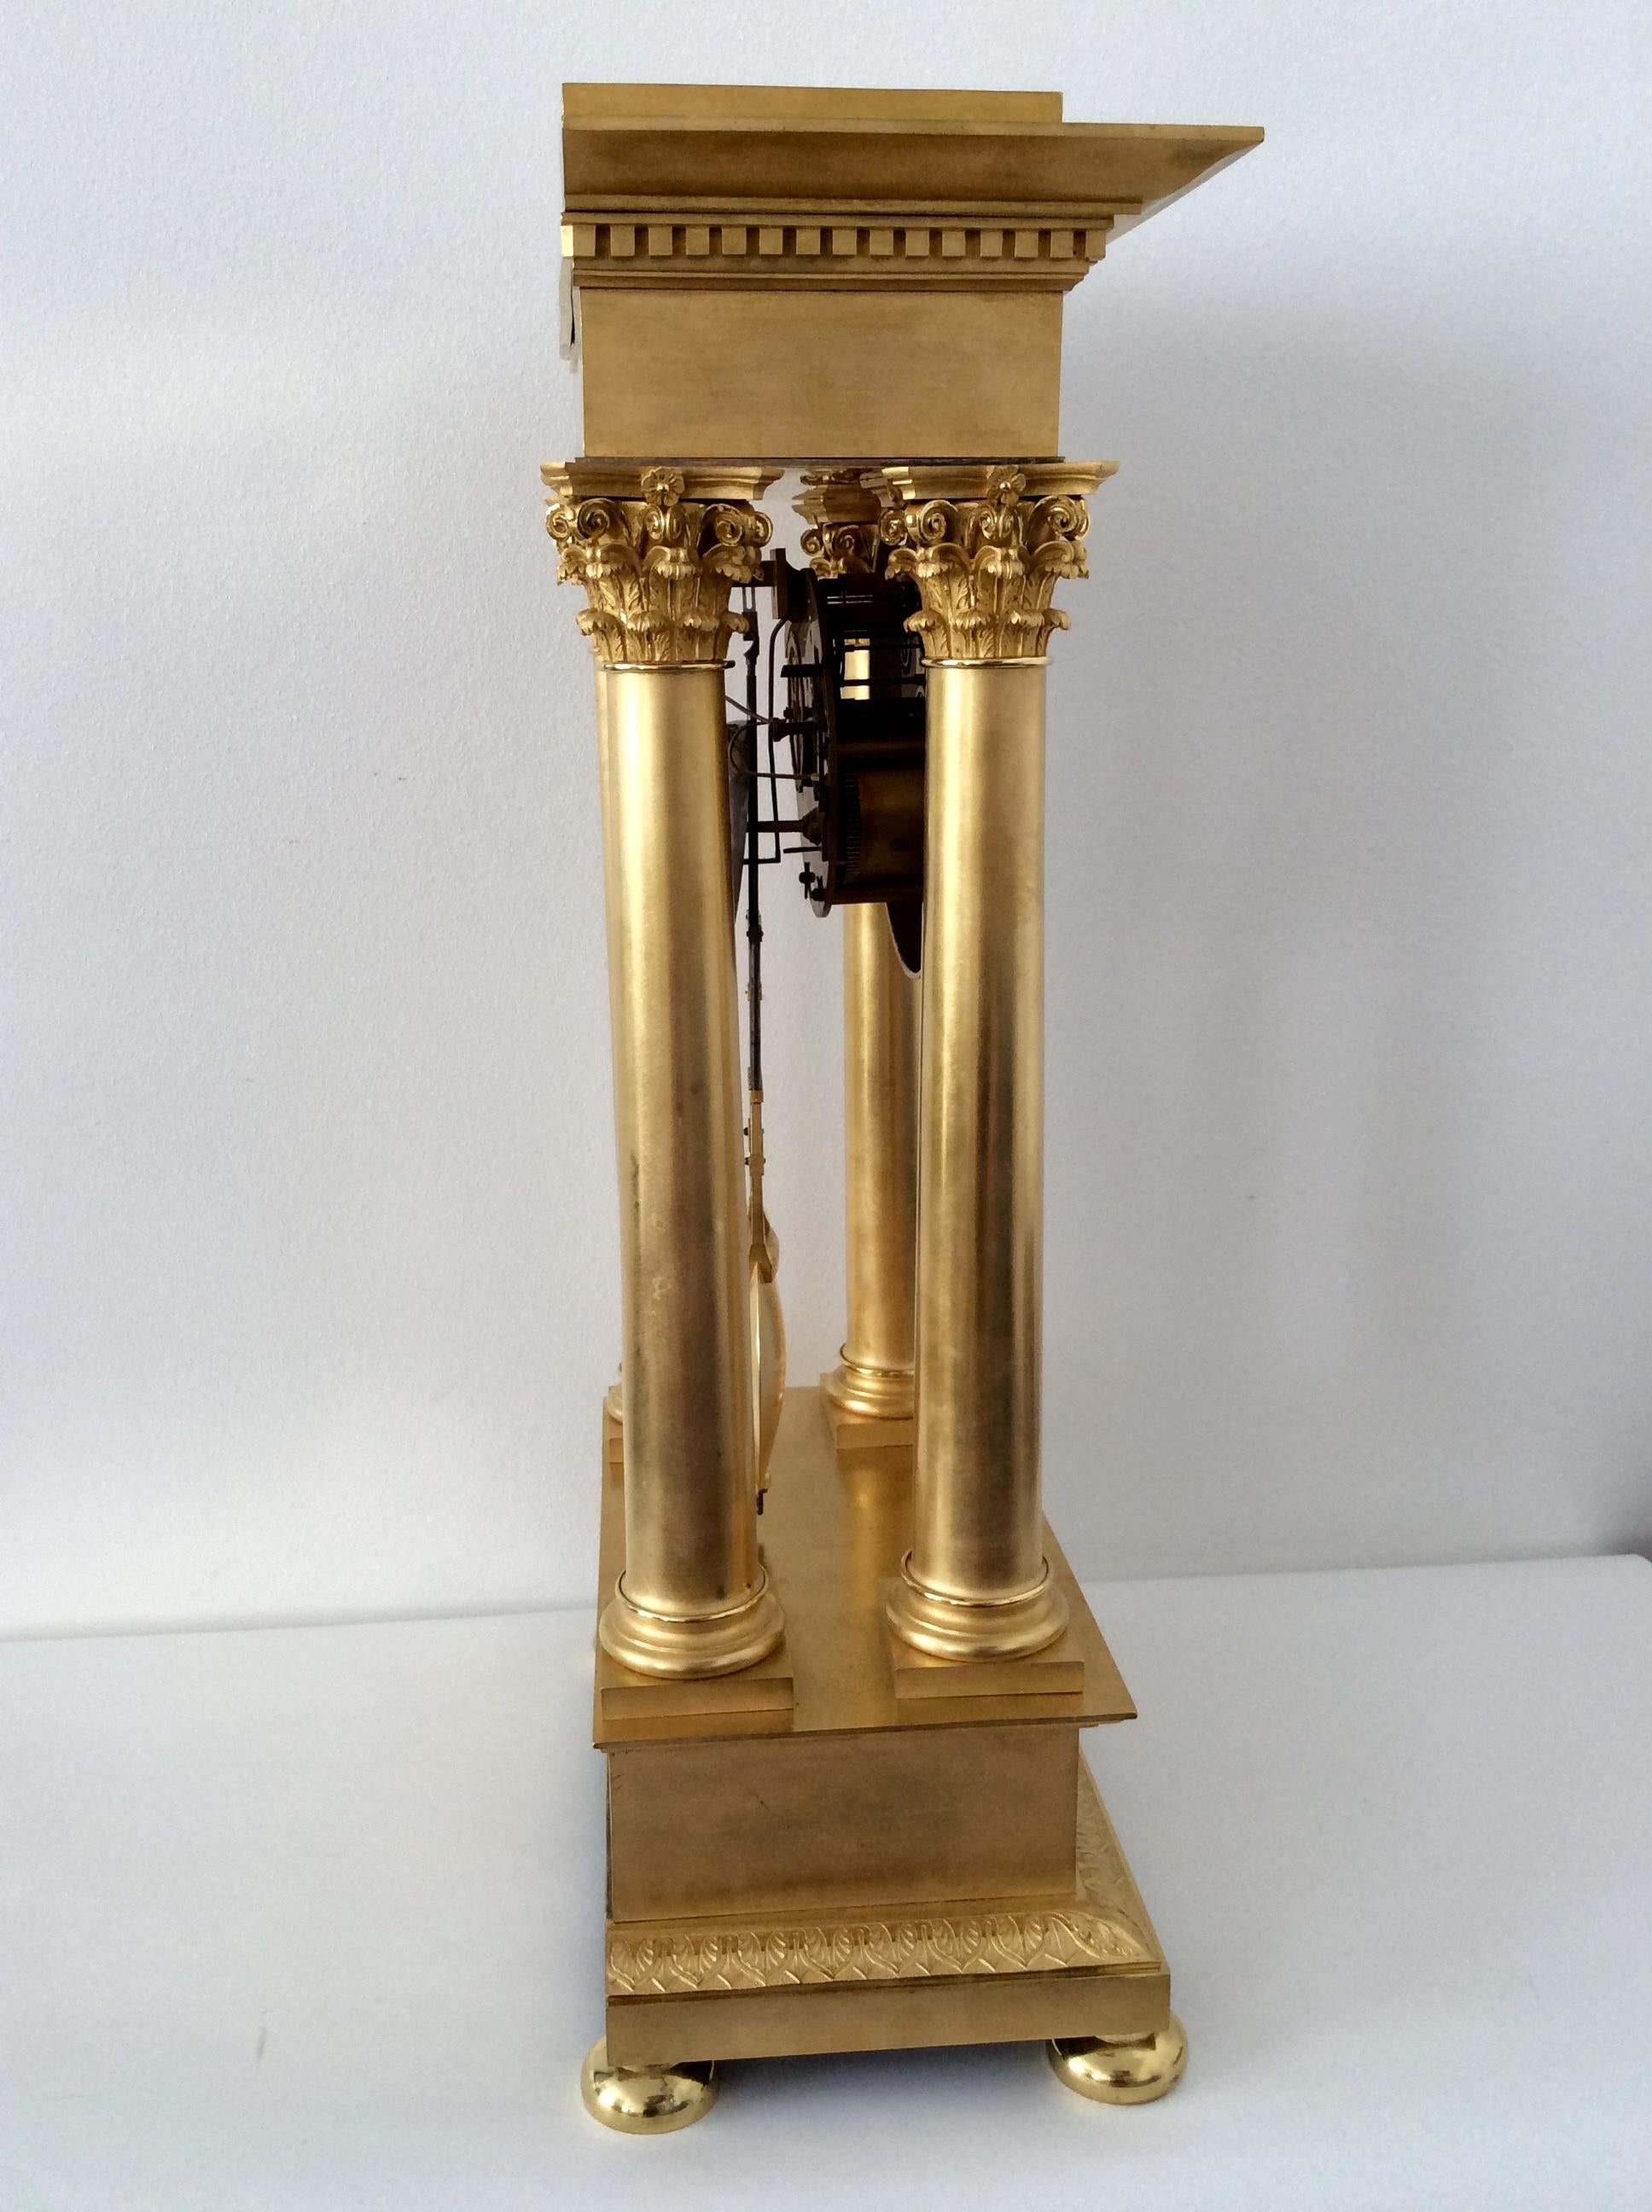 A large French Empire portico mantel regulator, circa 1810 very nice gilded, supported by Roman Corinthian columns, marked on dial
LeRoy Du Roi a Paris. Very nice.